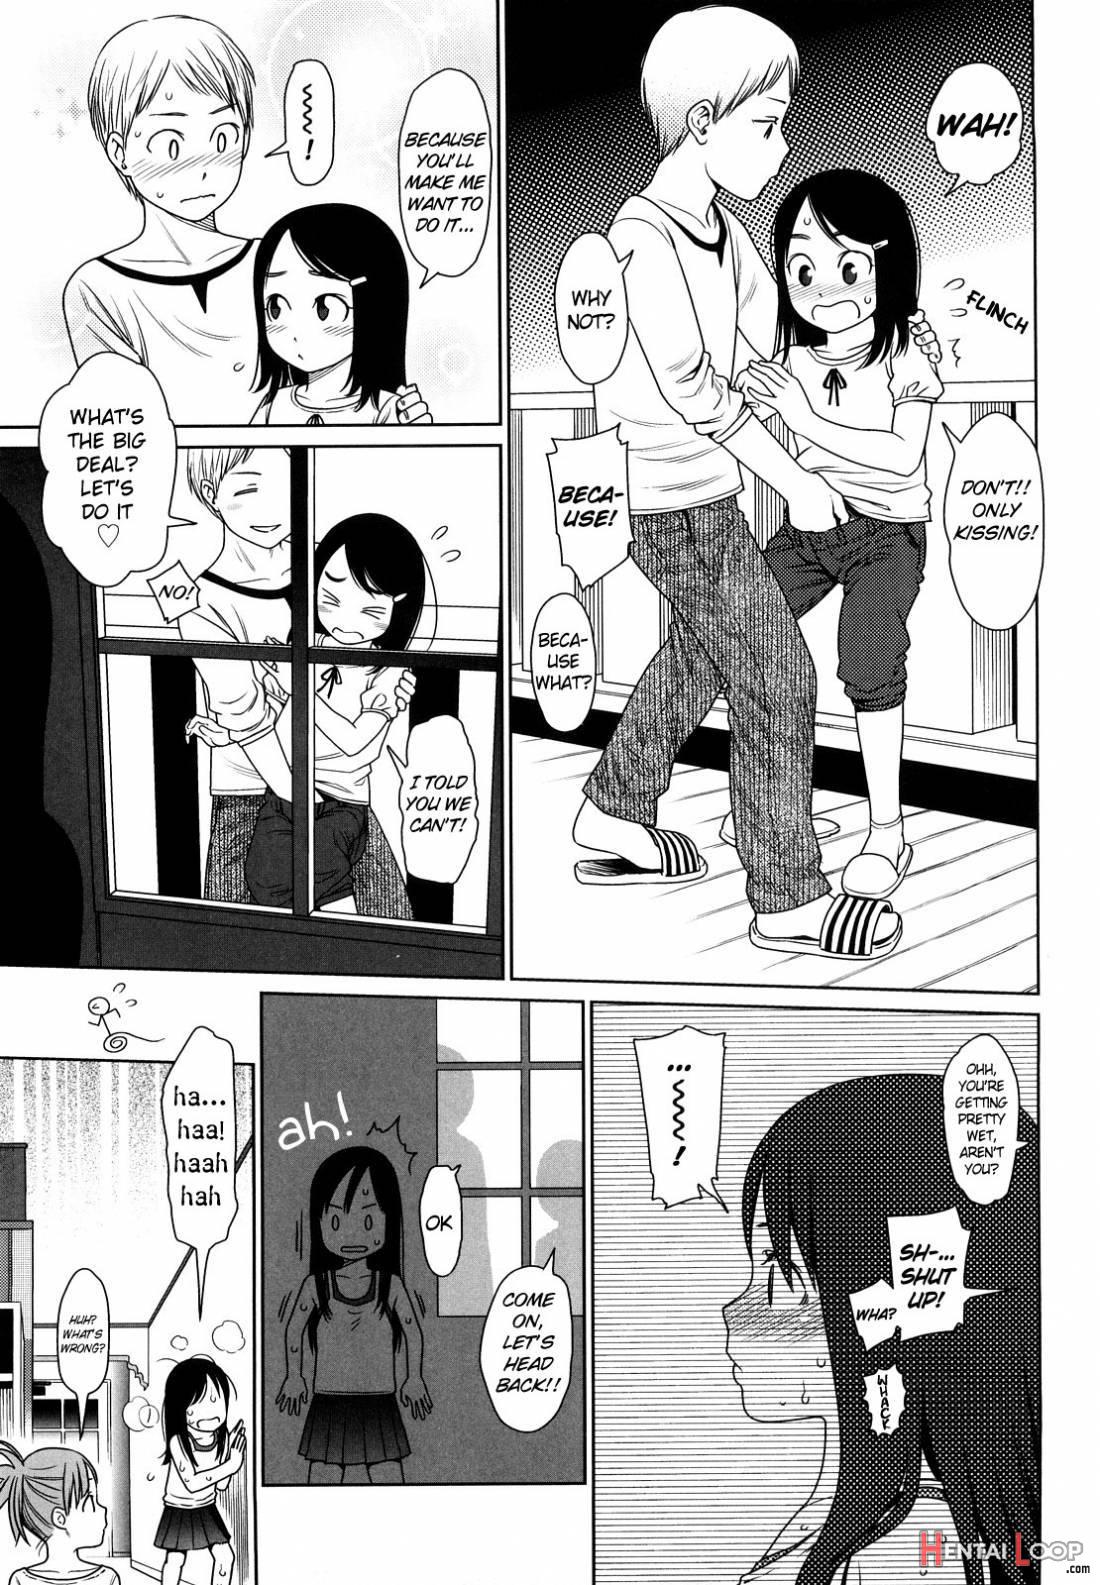 Japanese Preteen Suite page 158